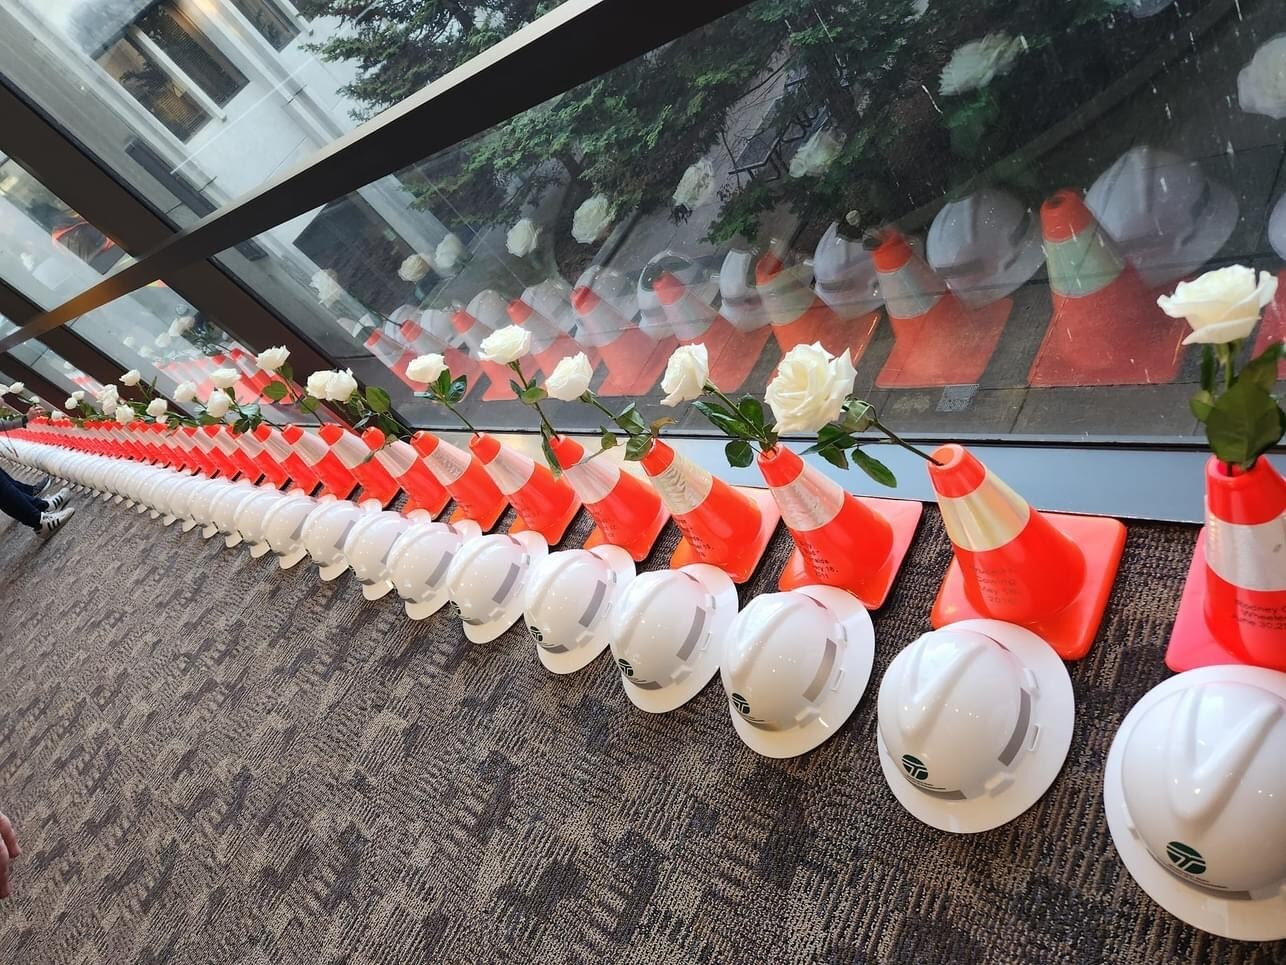 Line of traffic cones, hard hats and roses in a hallway in a building